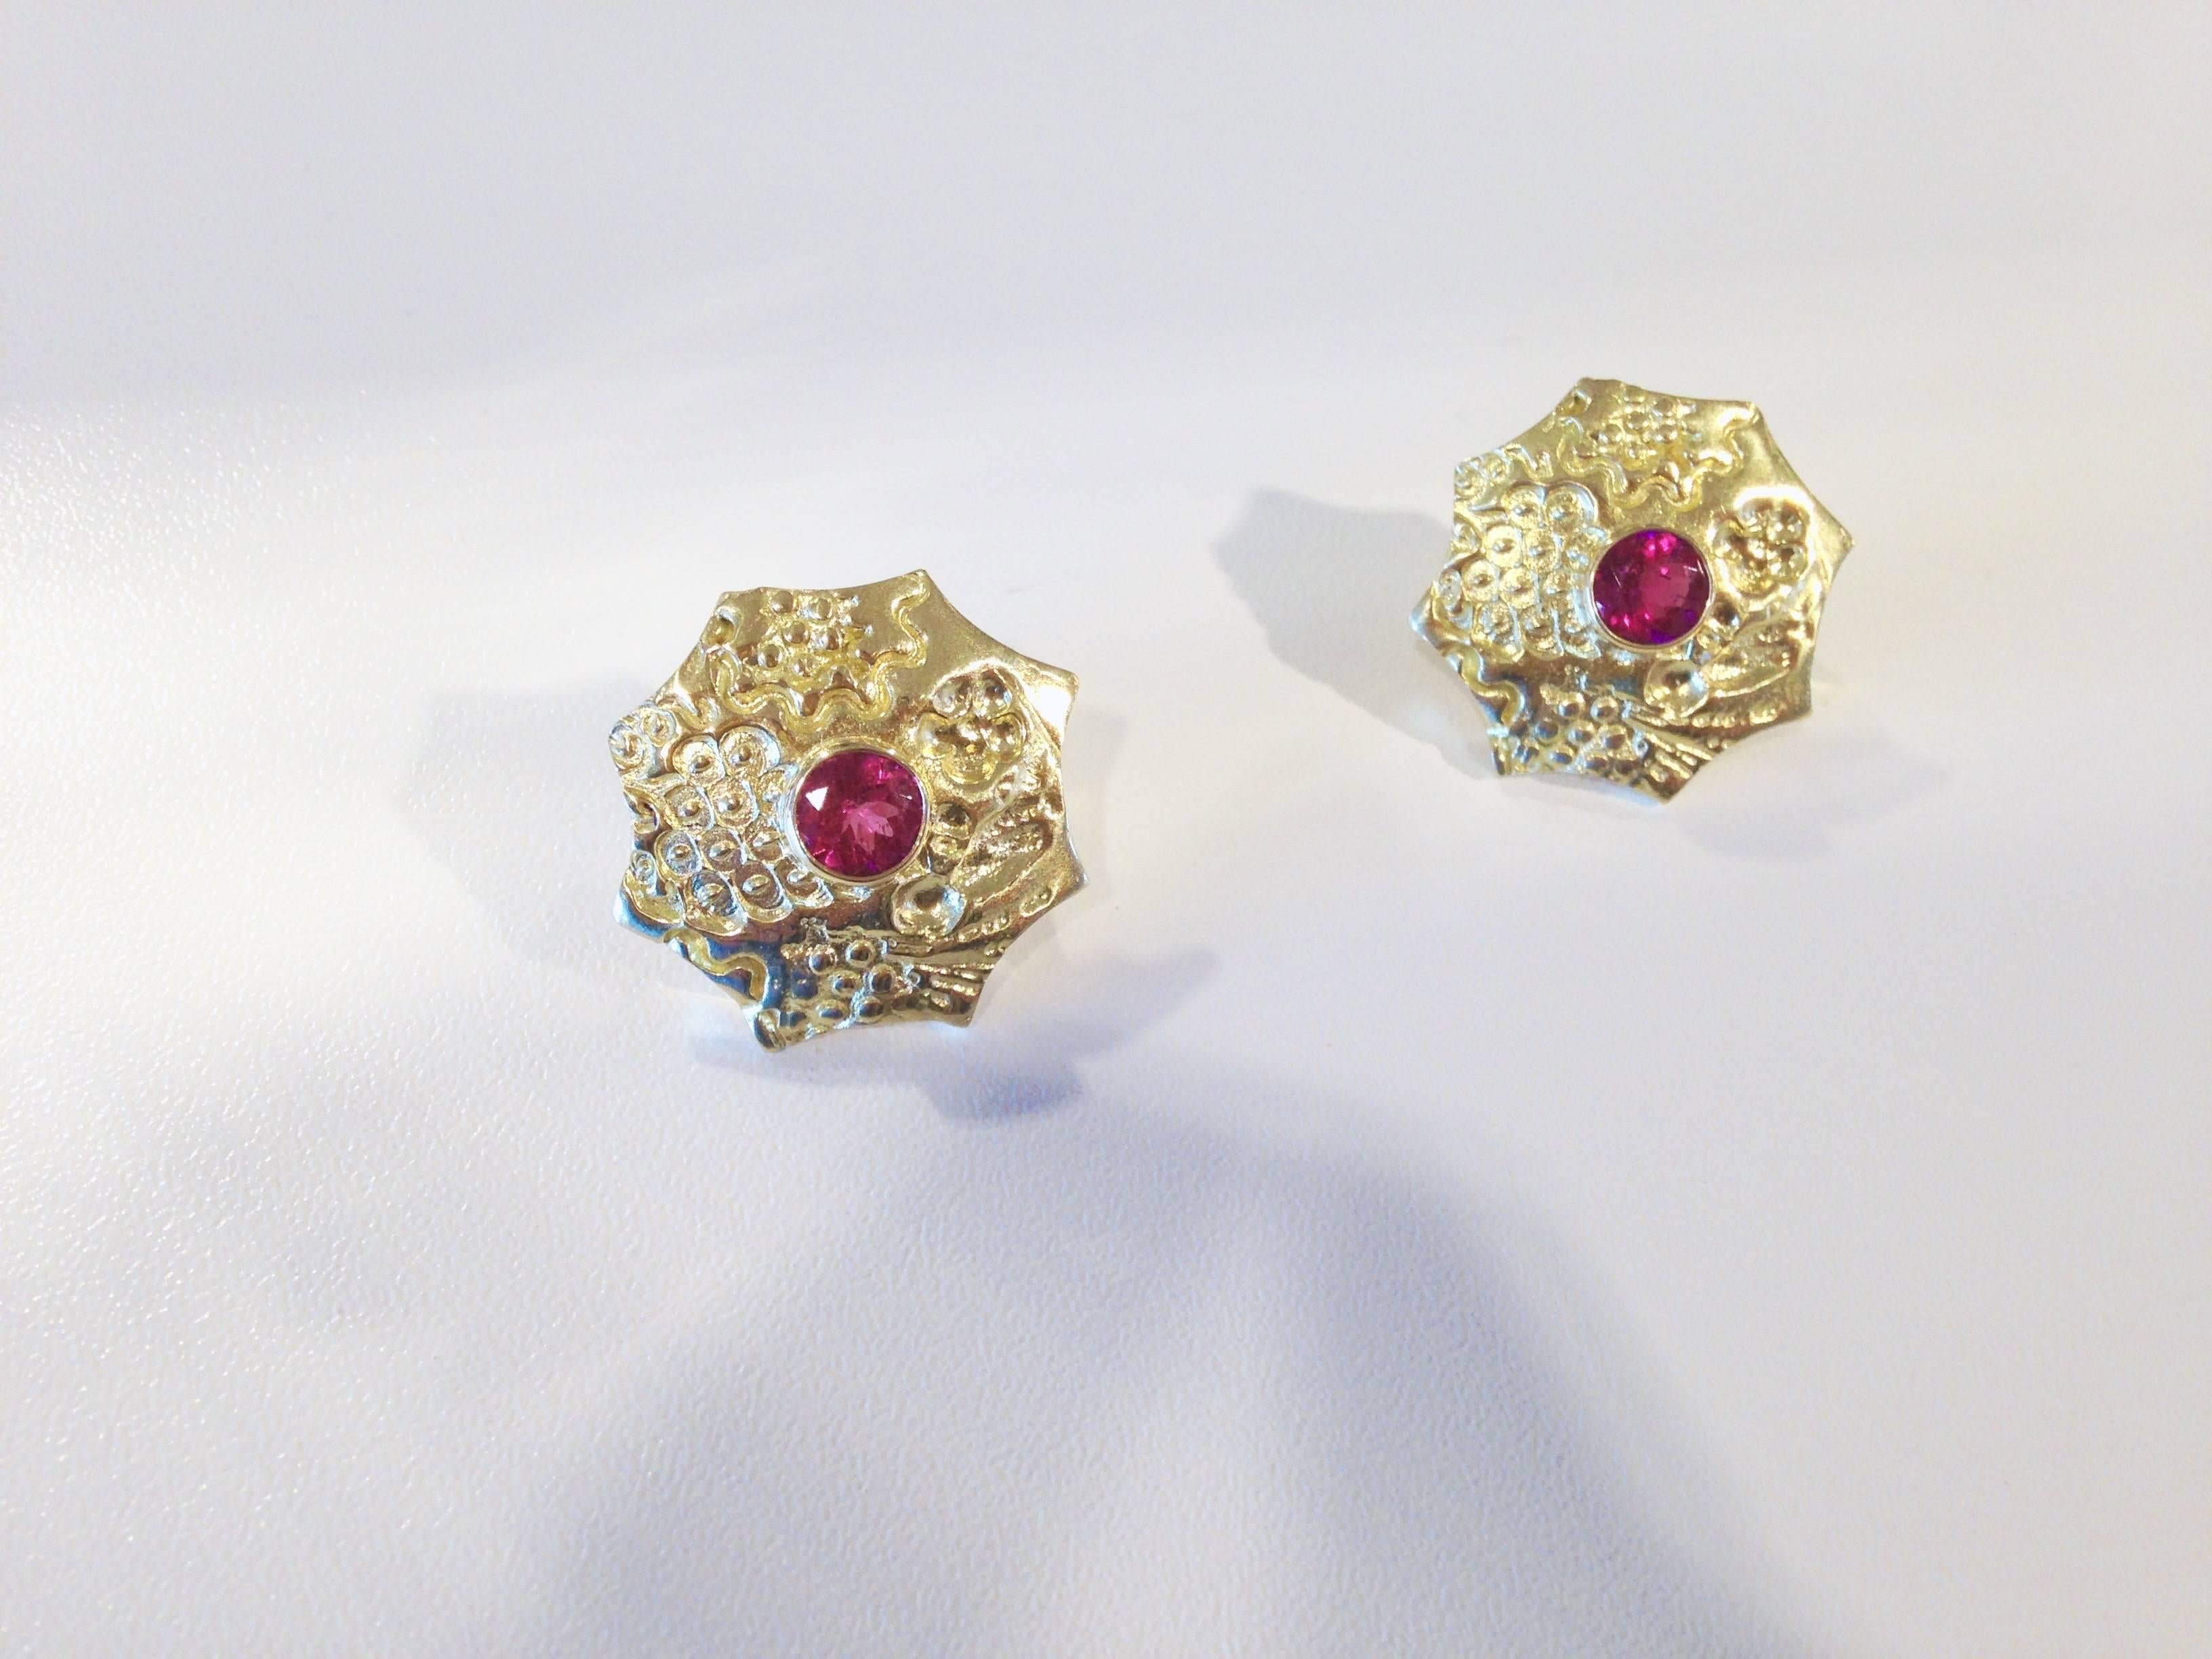 These Susan Lister Locke earrings are made with 1.60ct Red Tourmalines set in her original 18k Gold Sea Urchin design. The variety of the raised textures adds an elegance to the already striking color of the tourmalines. Omega clasps secure these